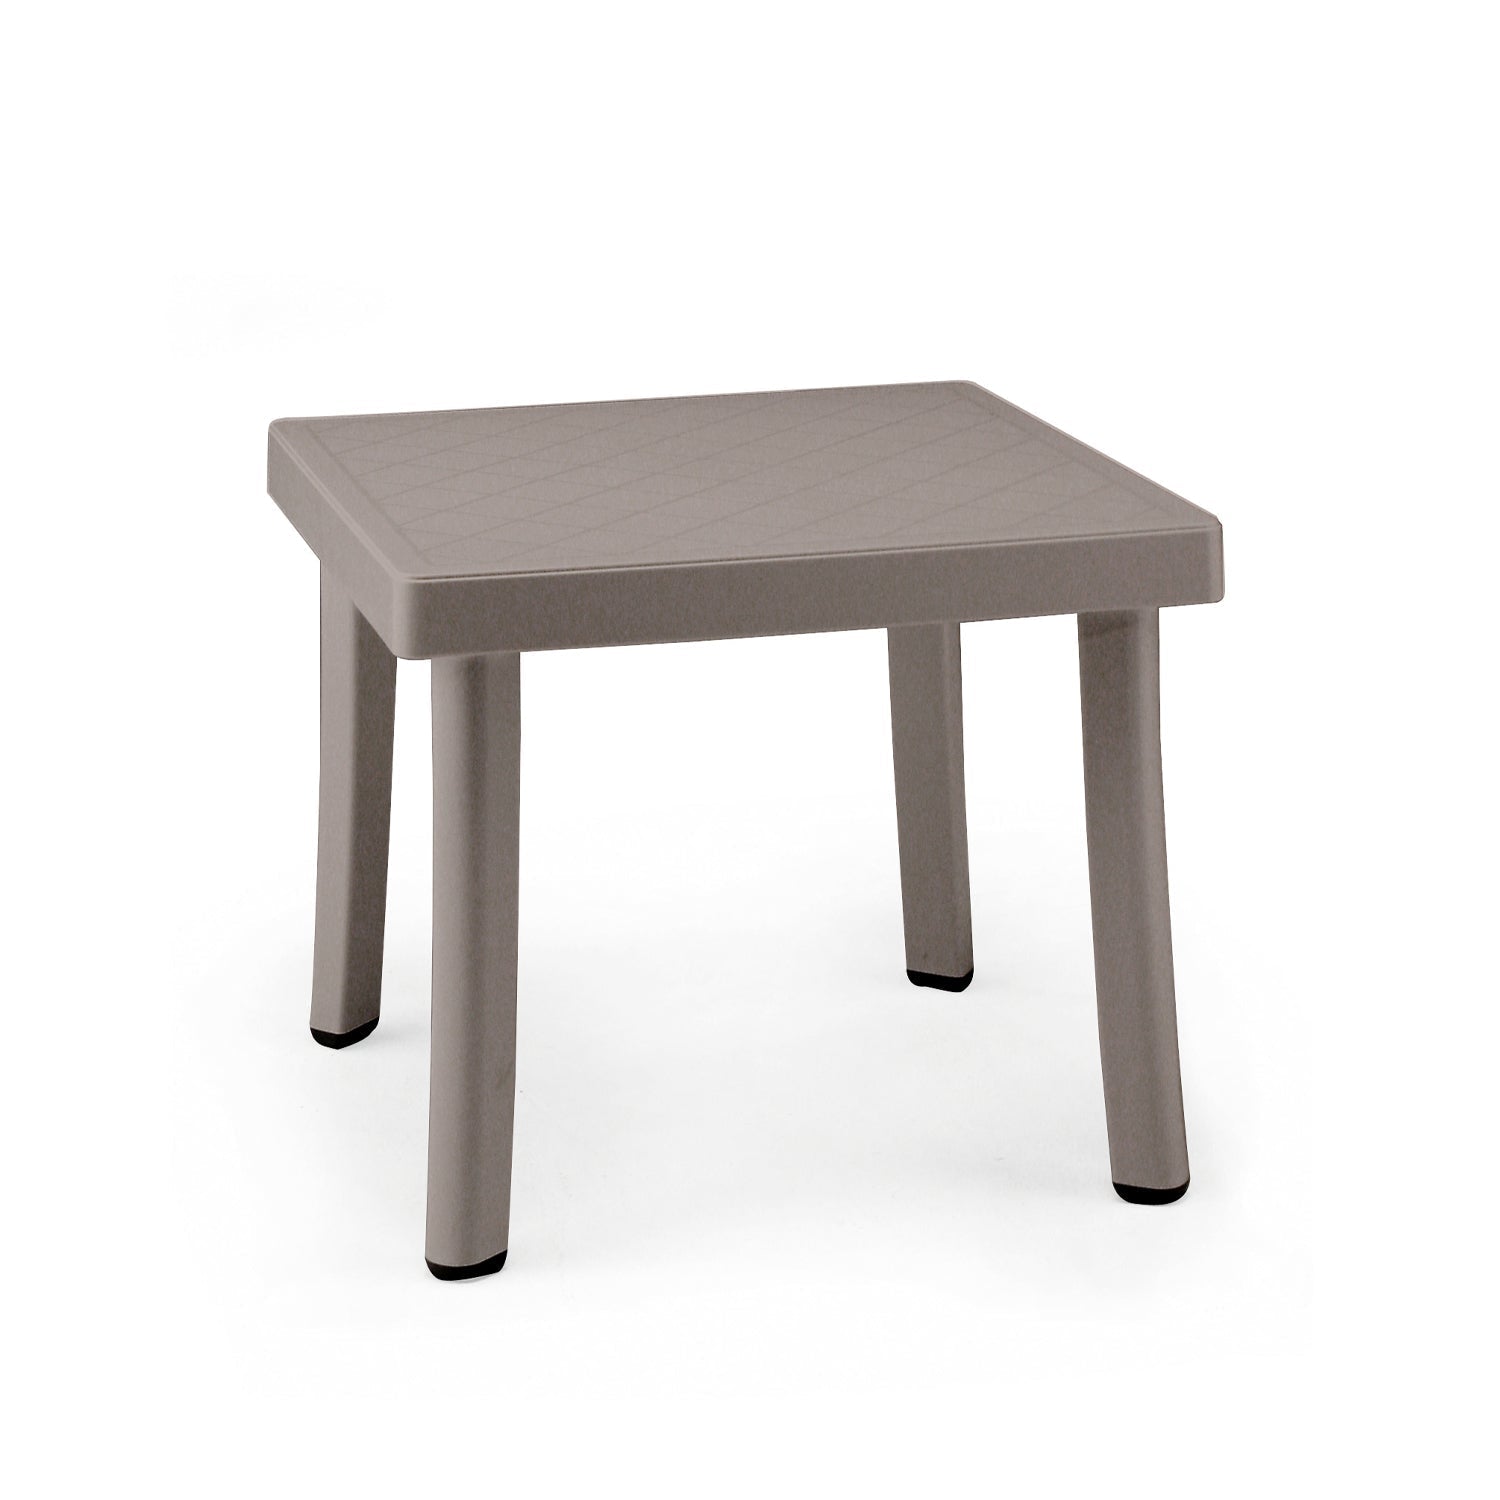 Rodi Garden Table By Nardi In Taupe